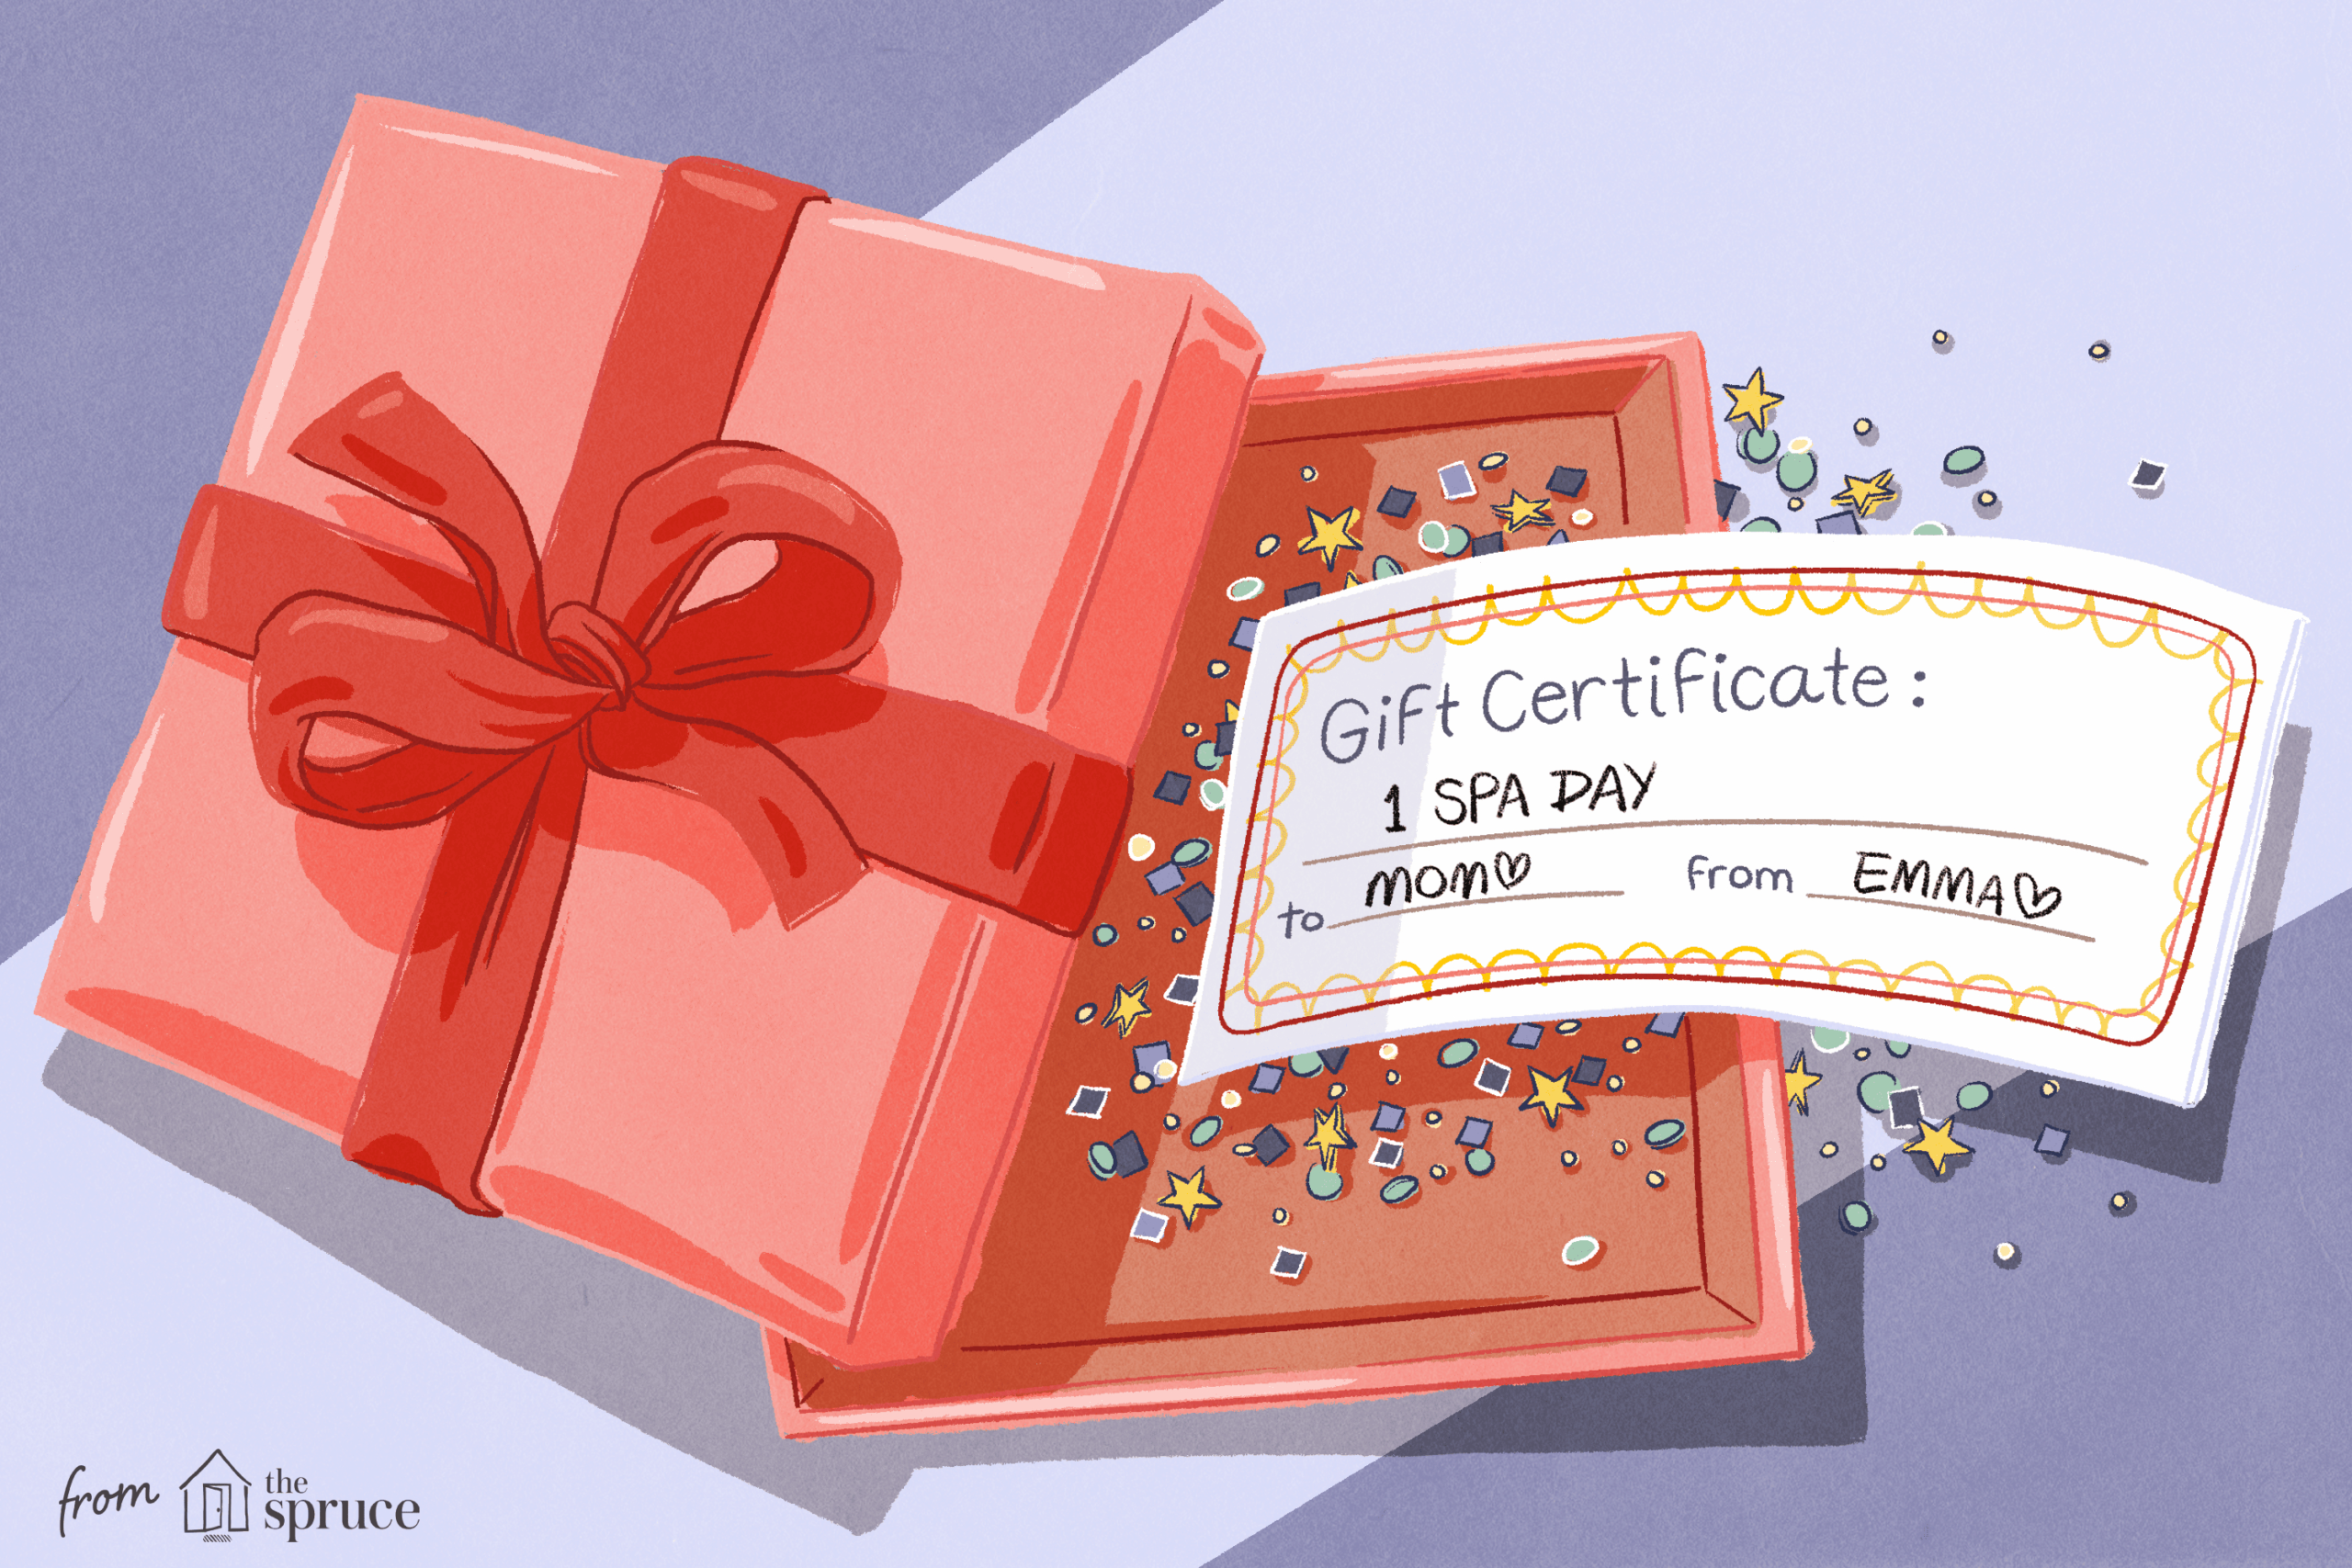 Free Gift Certificate Templates You Can Customize With Free Travel Gift Certificate Template